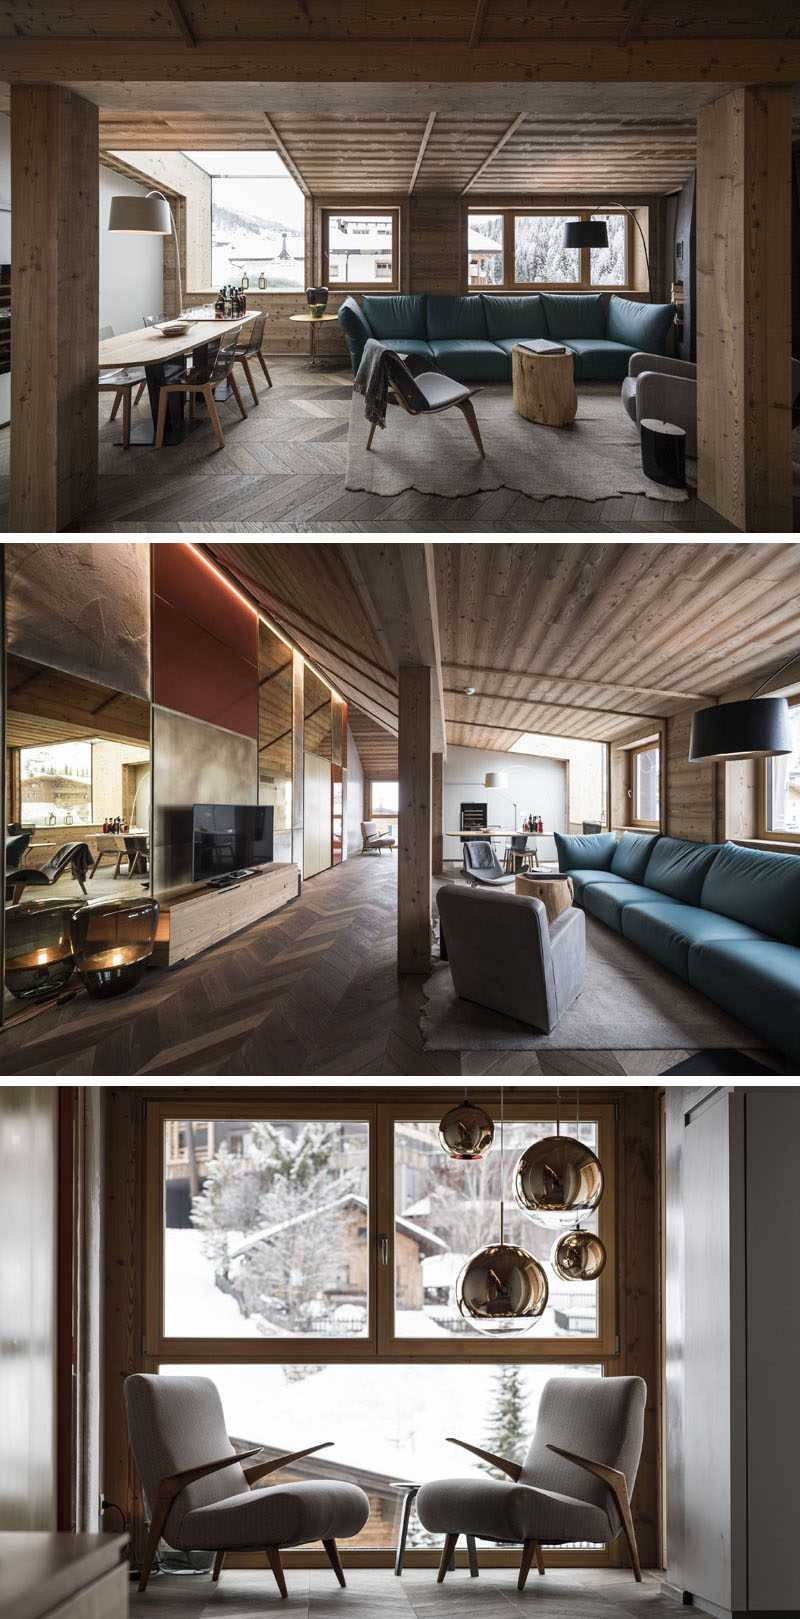 This hotel penthouse has a shared living room and dining room with windows overlooking the mountains, while a small sitting area nearby looks out towards the surrounding neighborhood. #LivingRoom #HotelSuite #InteriorDesign #Penthouse